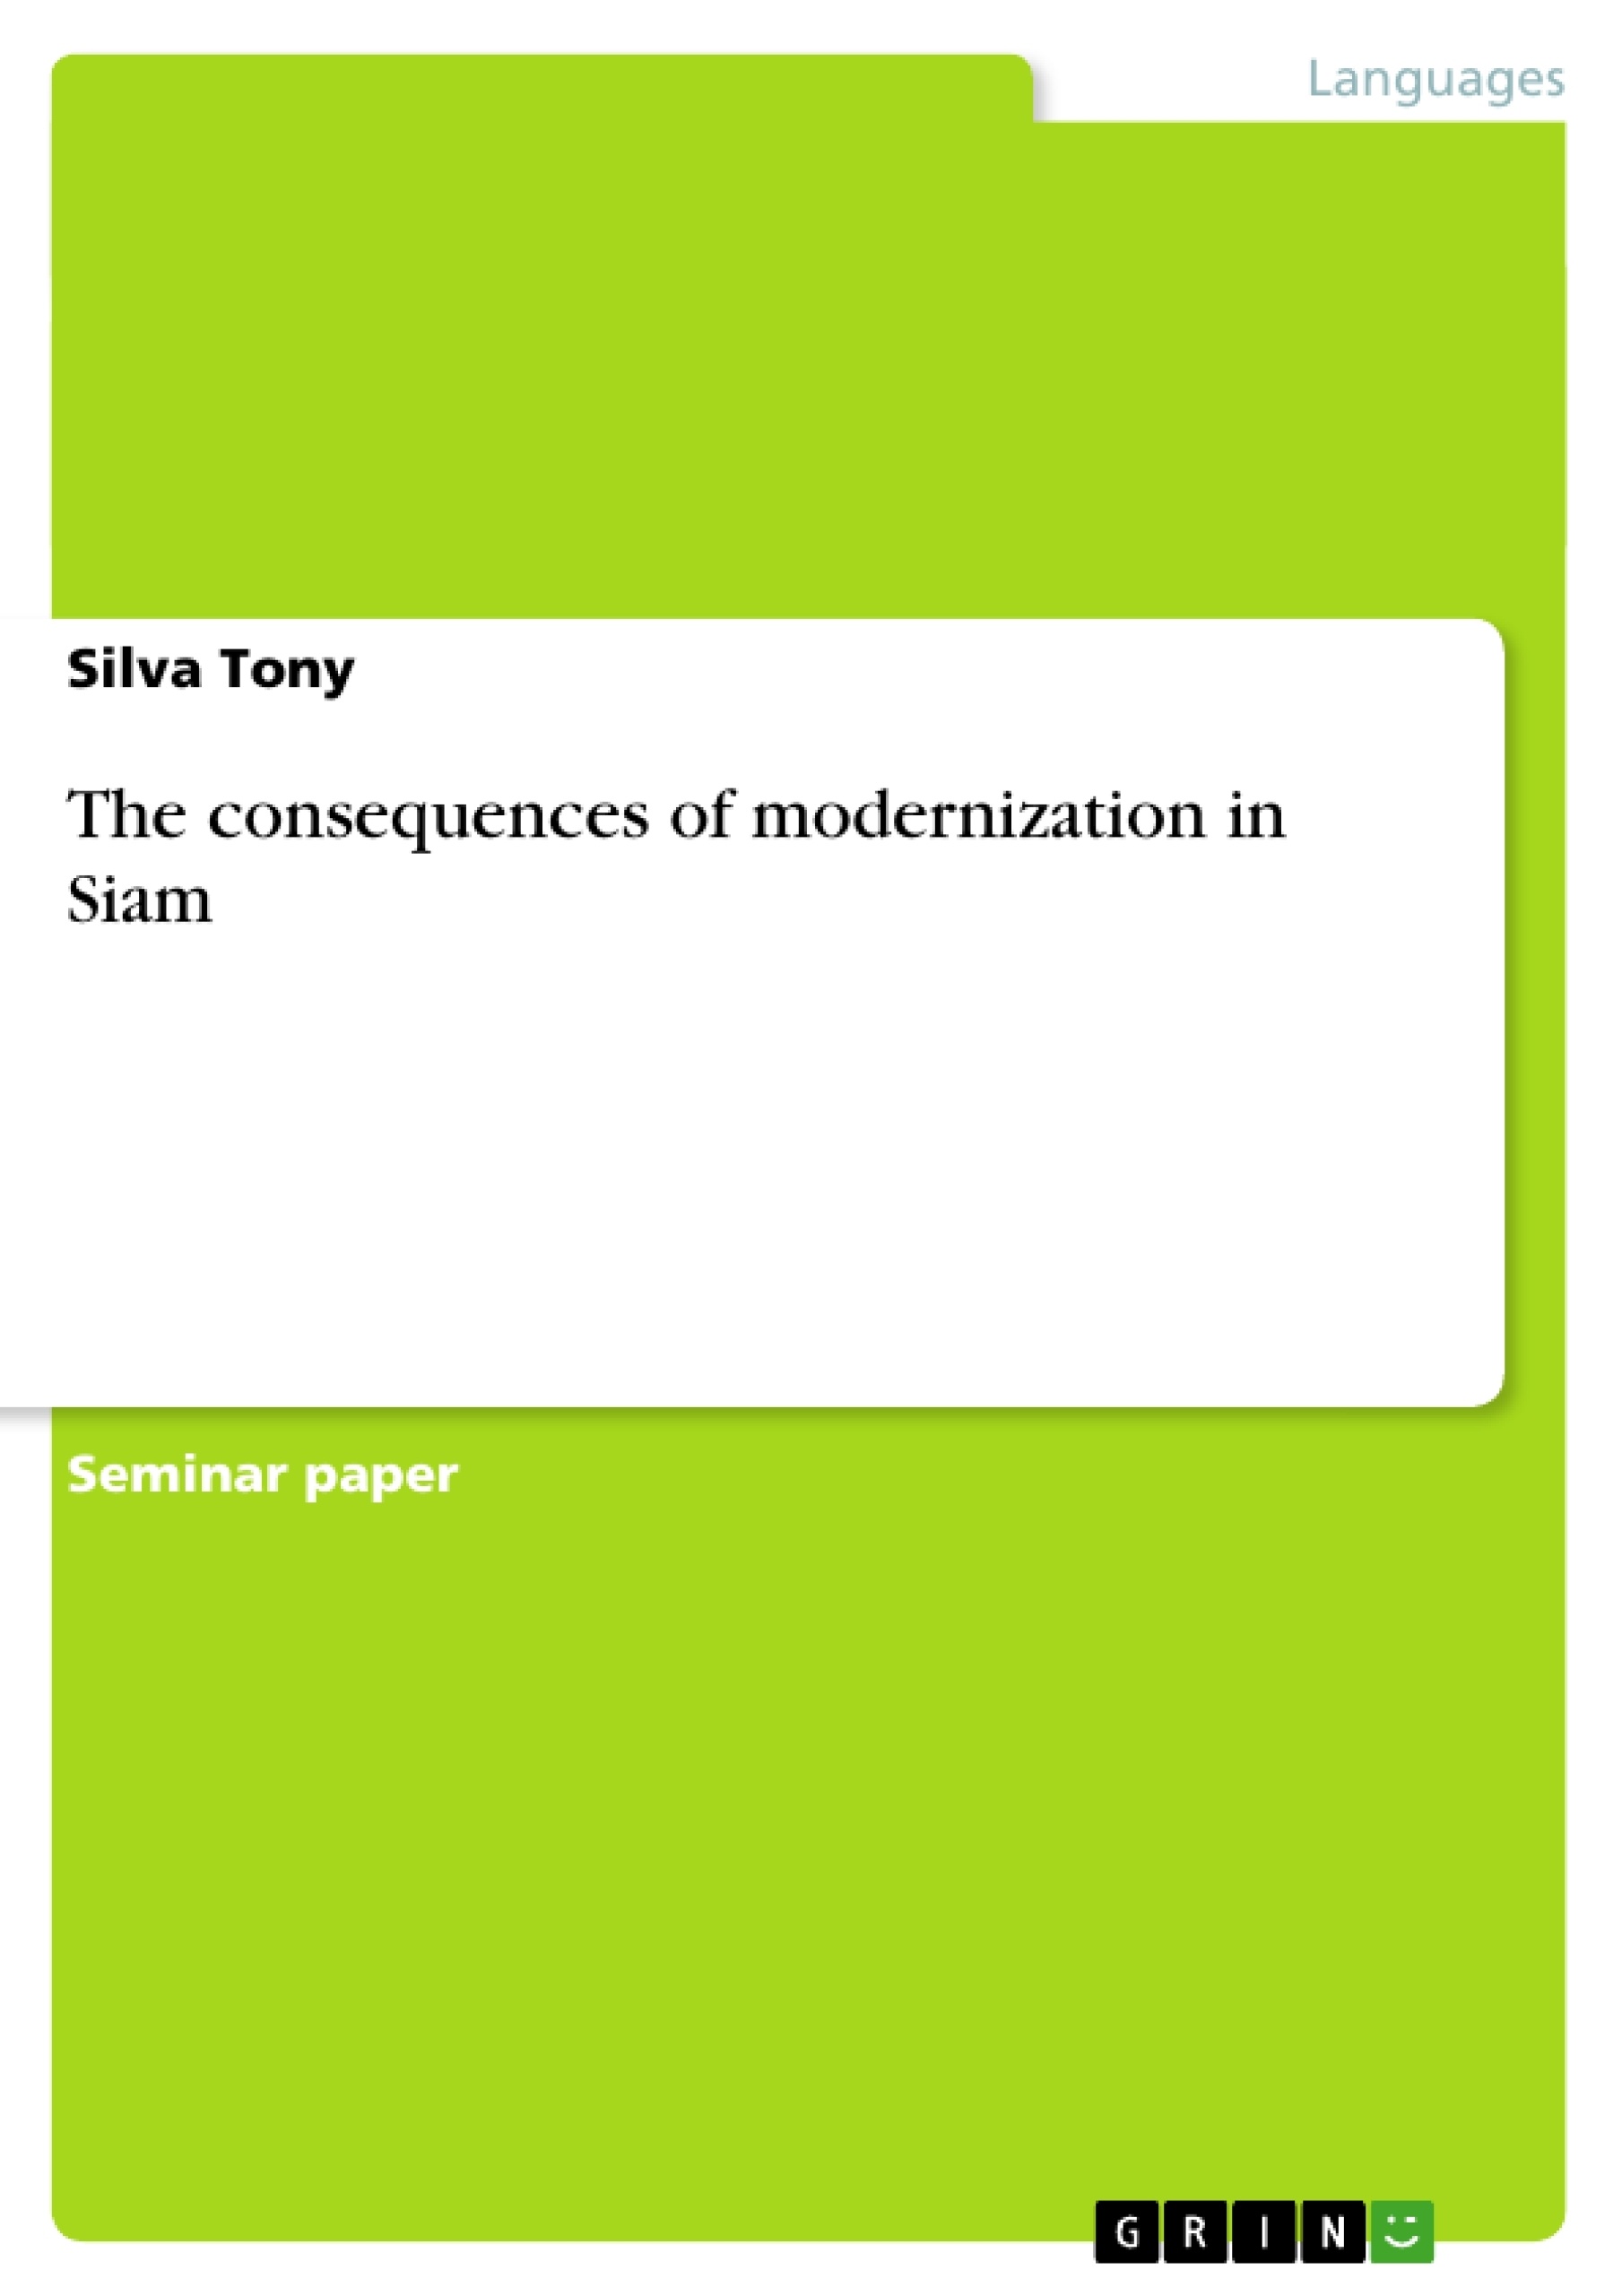 Title: The consequences of modernization in Siam